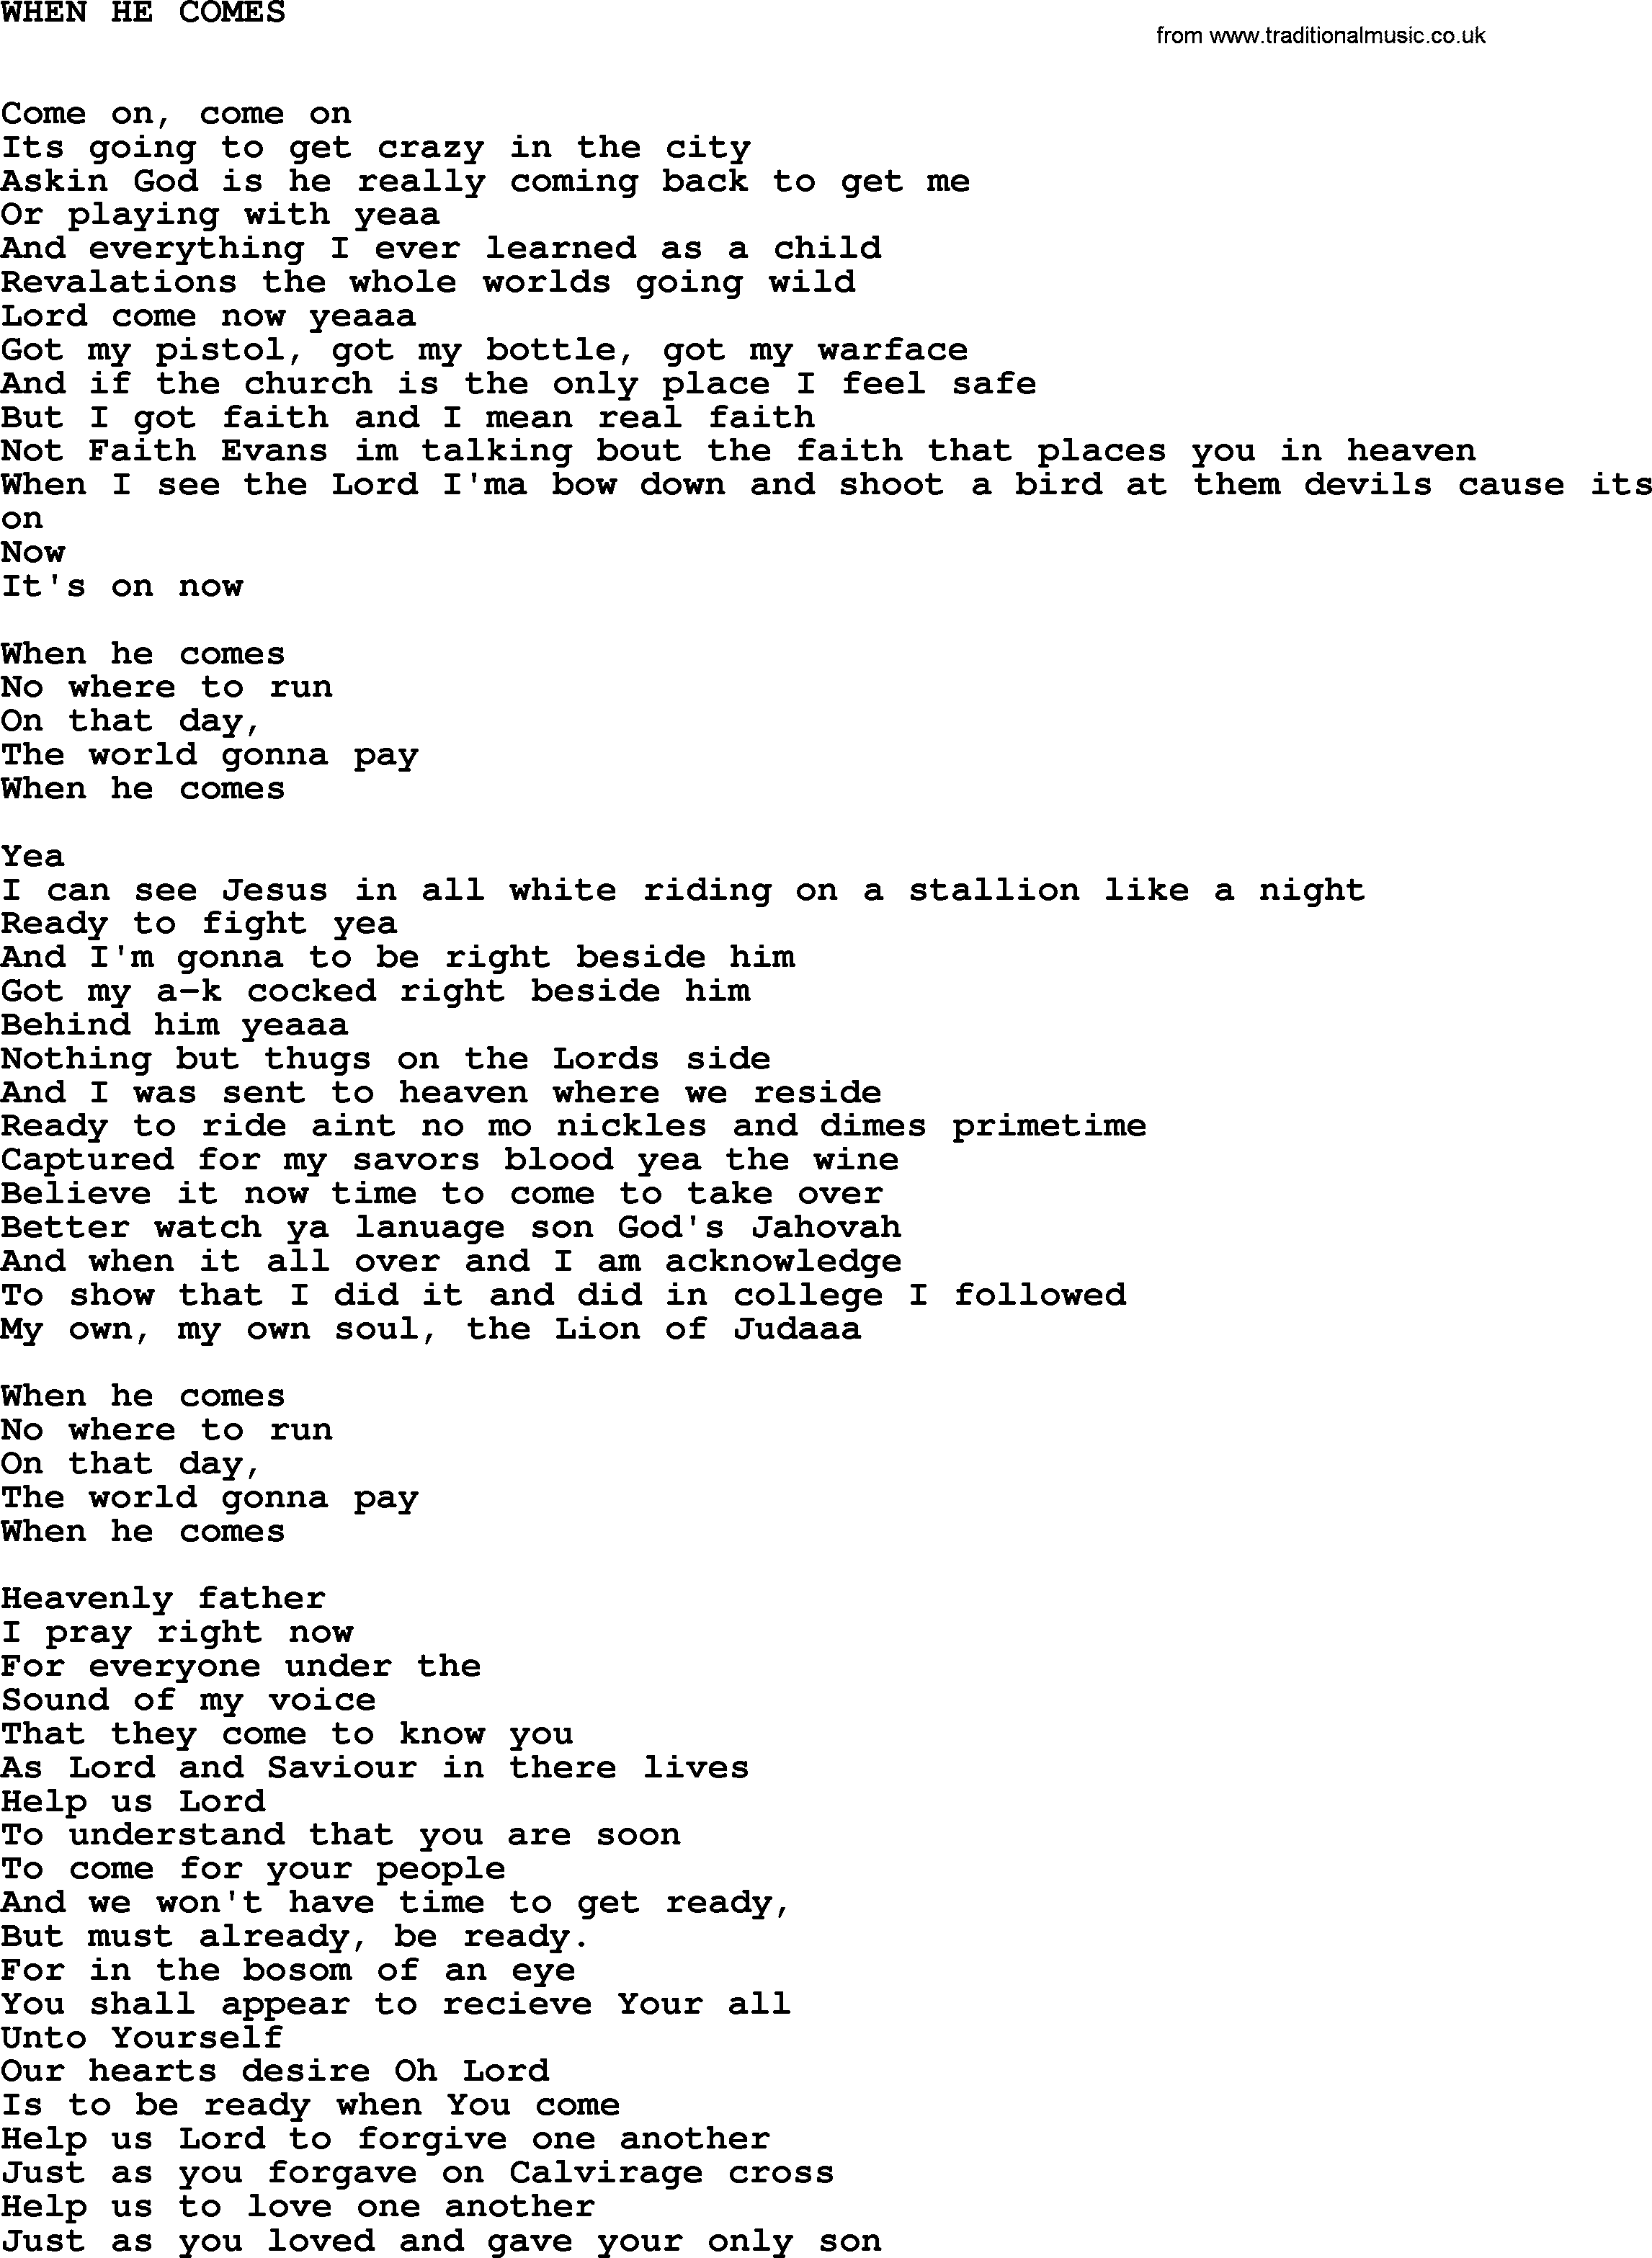 Johnny Cash song When He Comes.txt lyrics